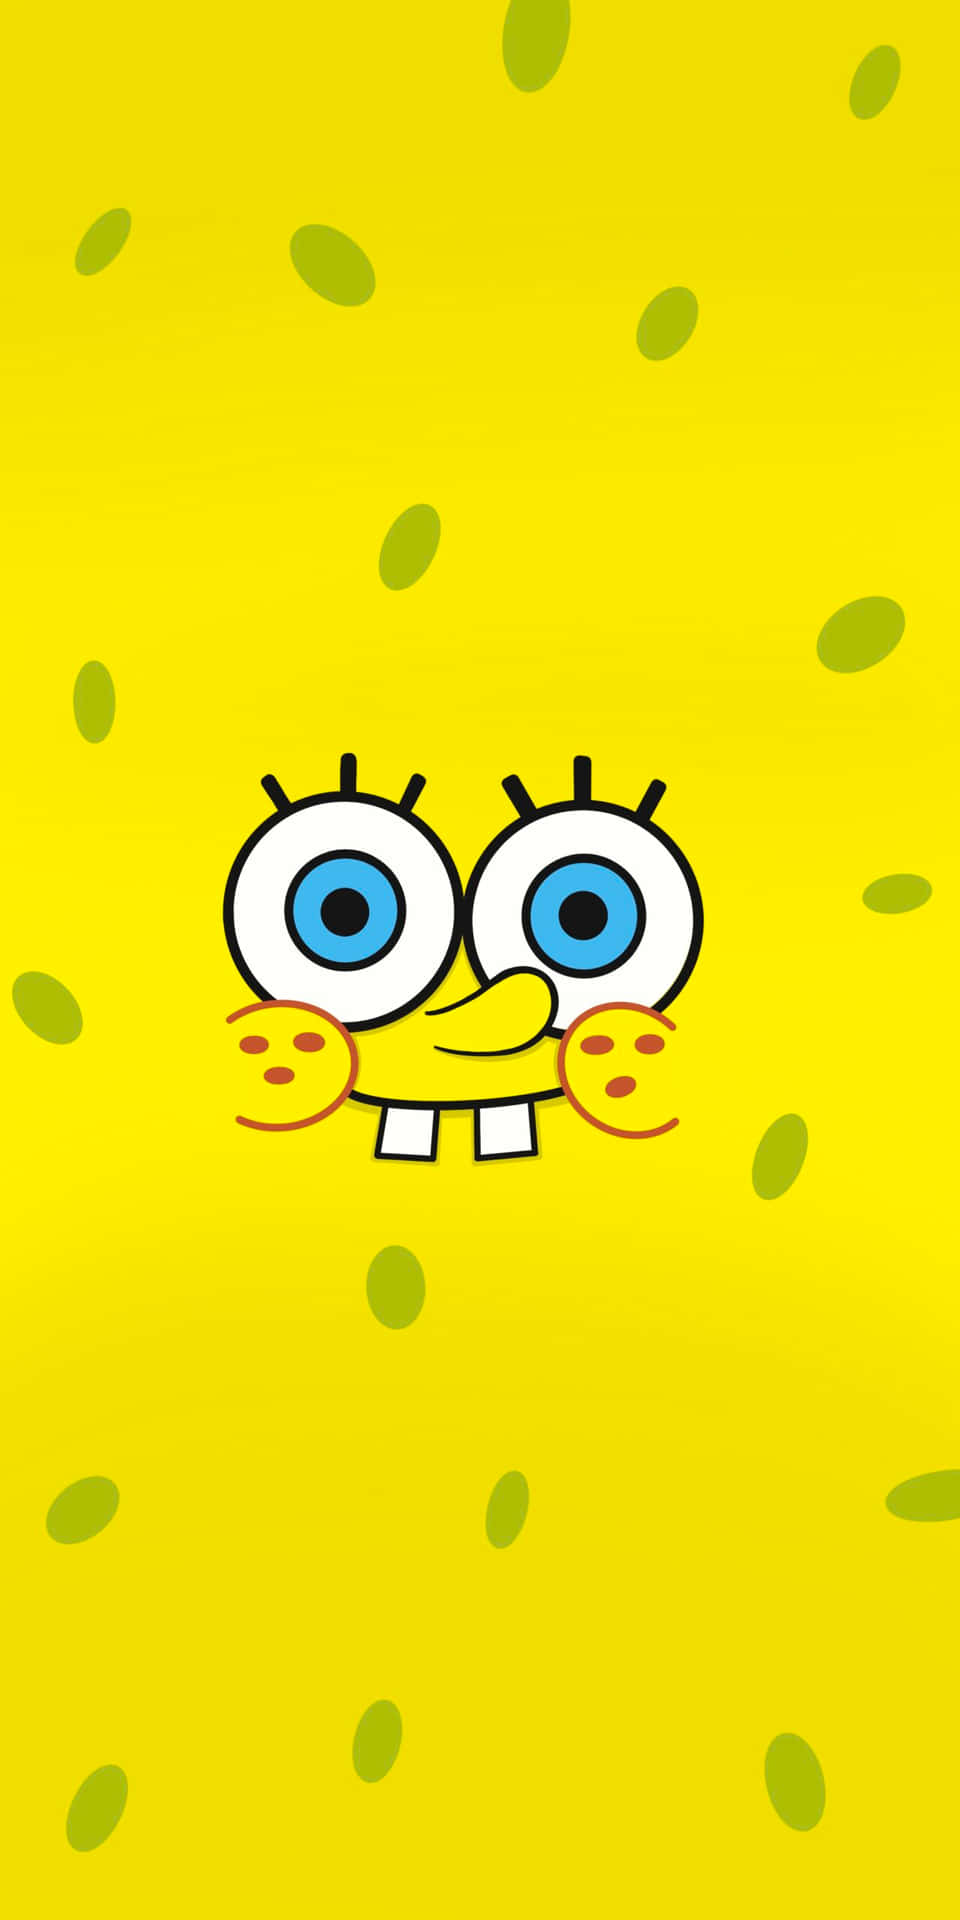 Get the Party Started with Spongebob's Face Wallpaper